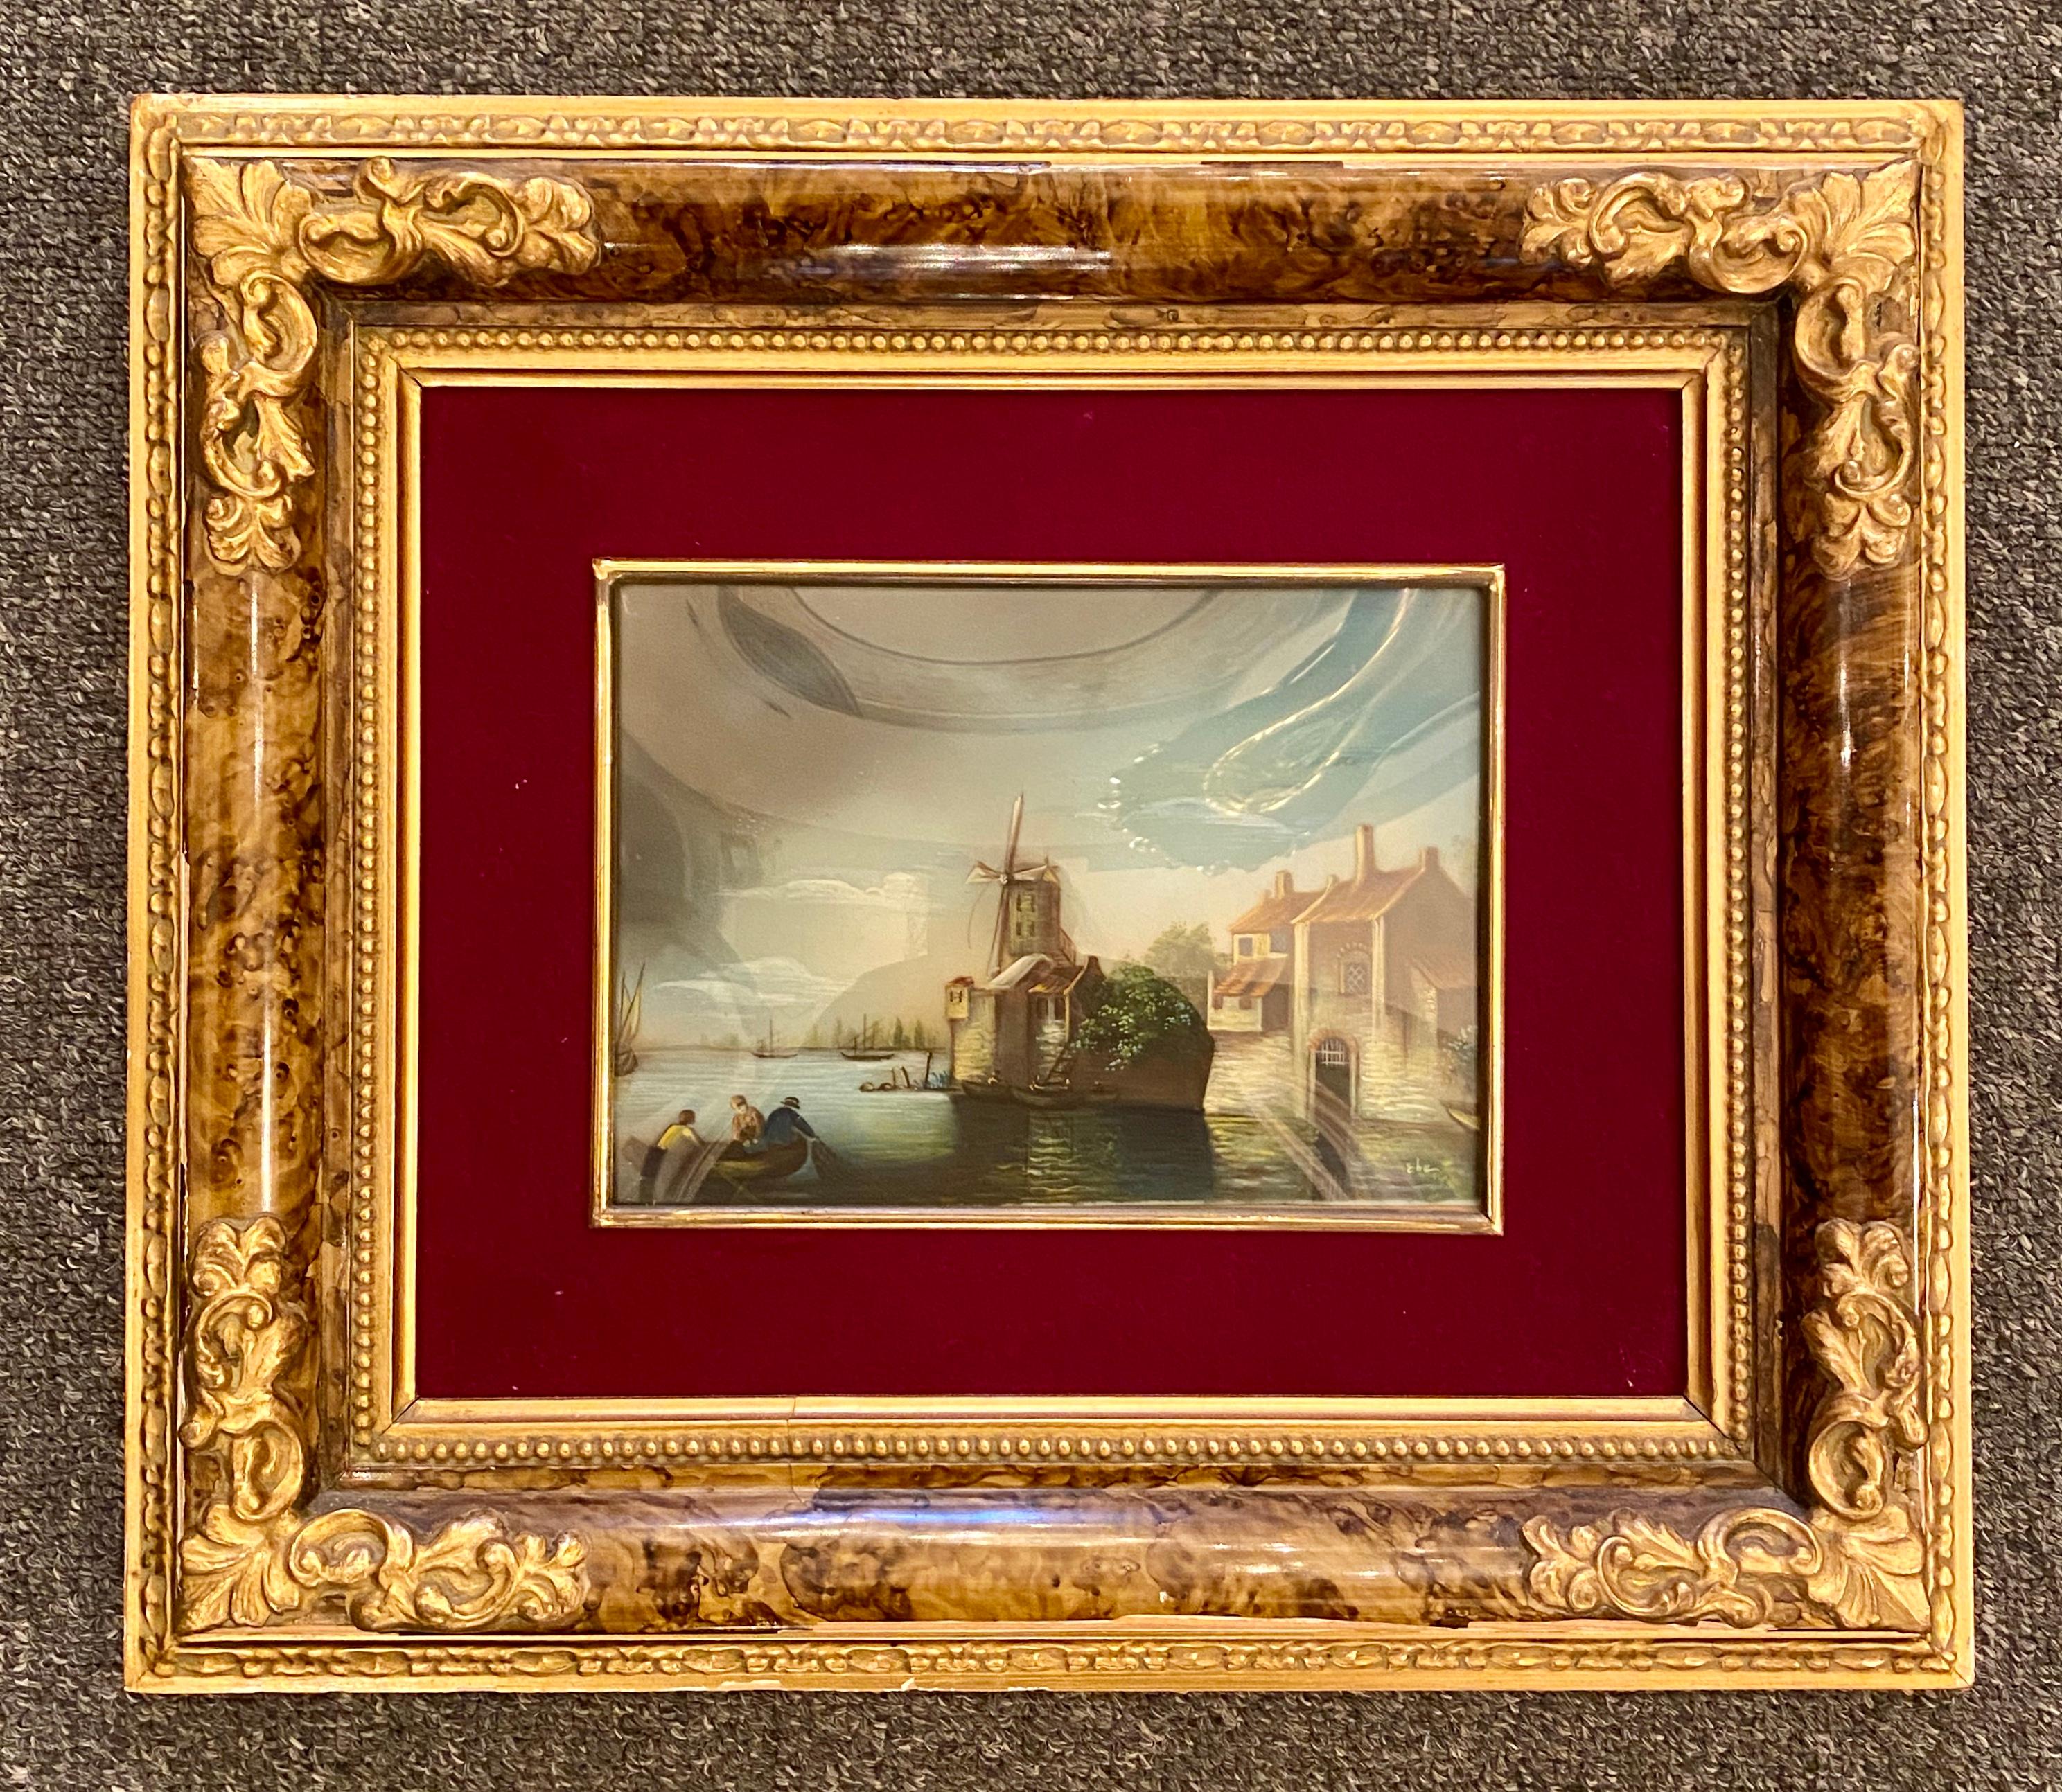 Antique Dutch framed harbor scene painting, Goache watercolor on card, circa 1860-1870.